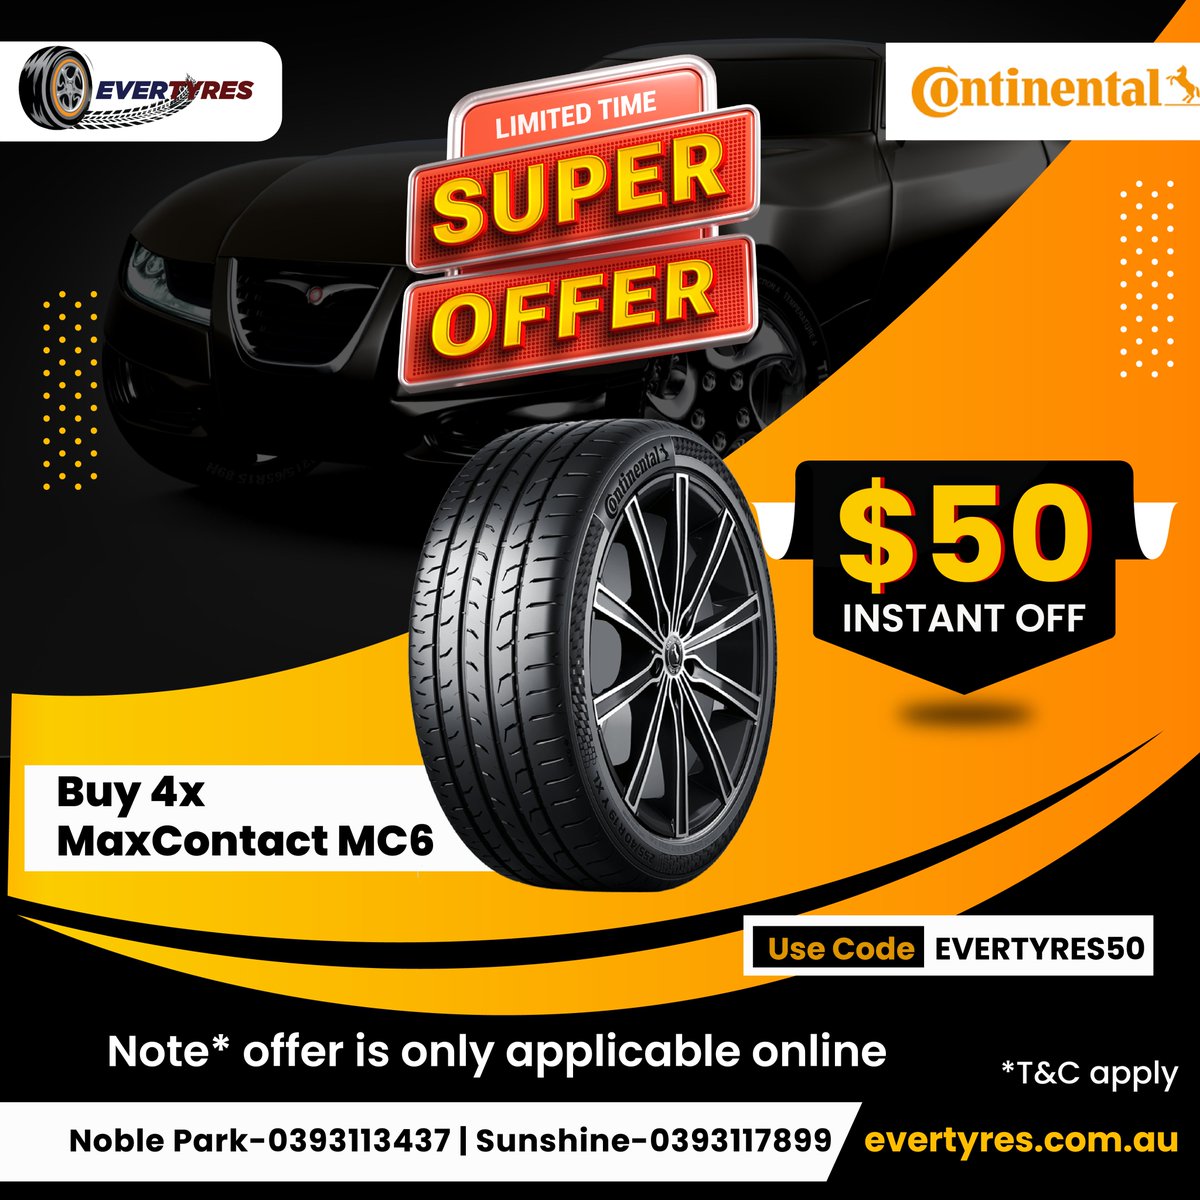 🚨Get $50 off instantly when you buy 4 Continental MC6 Tyres from Evertyres🚨

Hurry, limited-time offer! 🔥💰👀

✅Expert Fitting & Balancing 🔧👌
✅Fast & Secure Delivery 🚚💨
✅ Free Tyres Checkup Service 👨‍🔧

Note* offer only applicable on online

#evertyres #continentaltyres